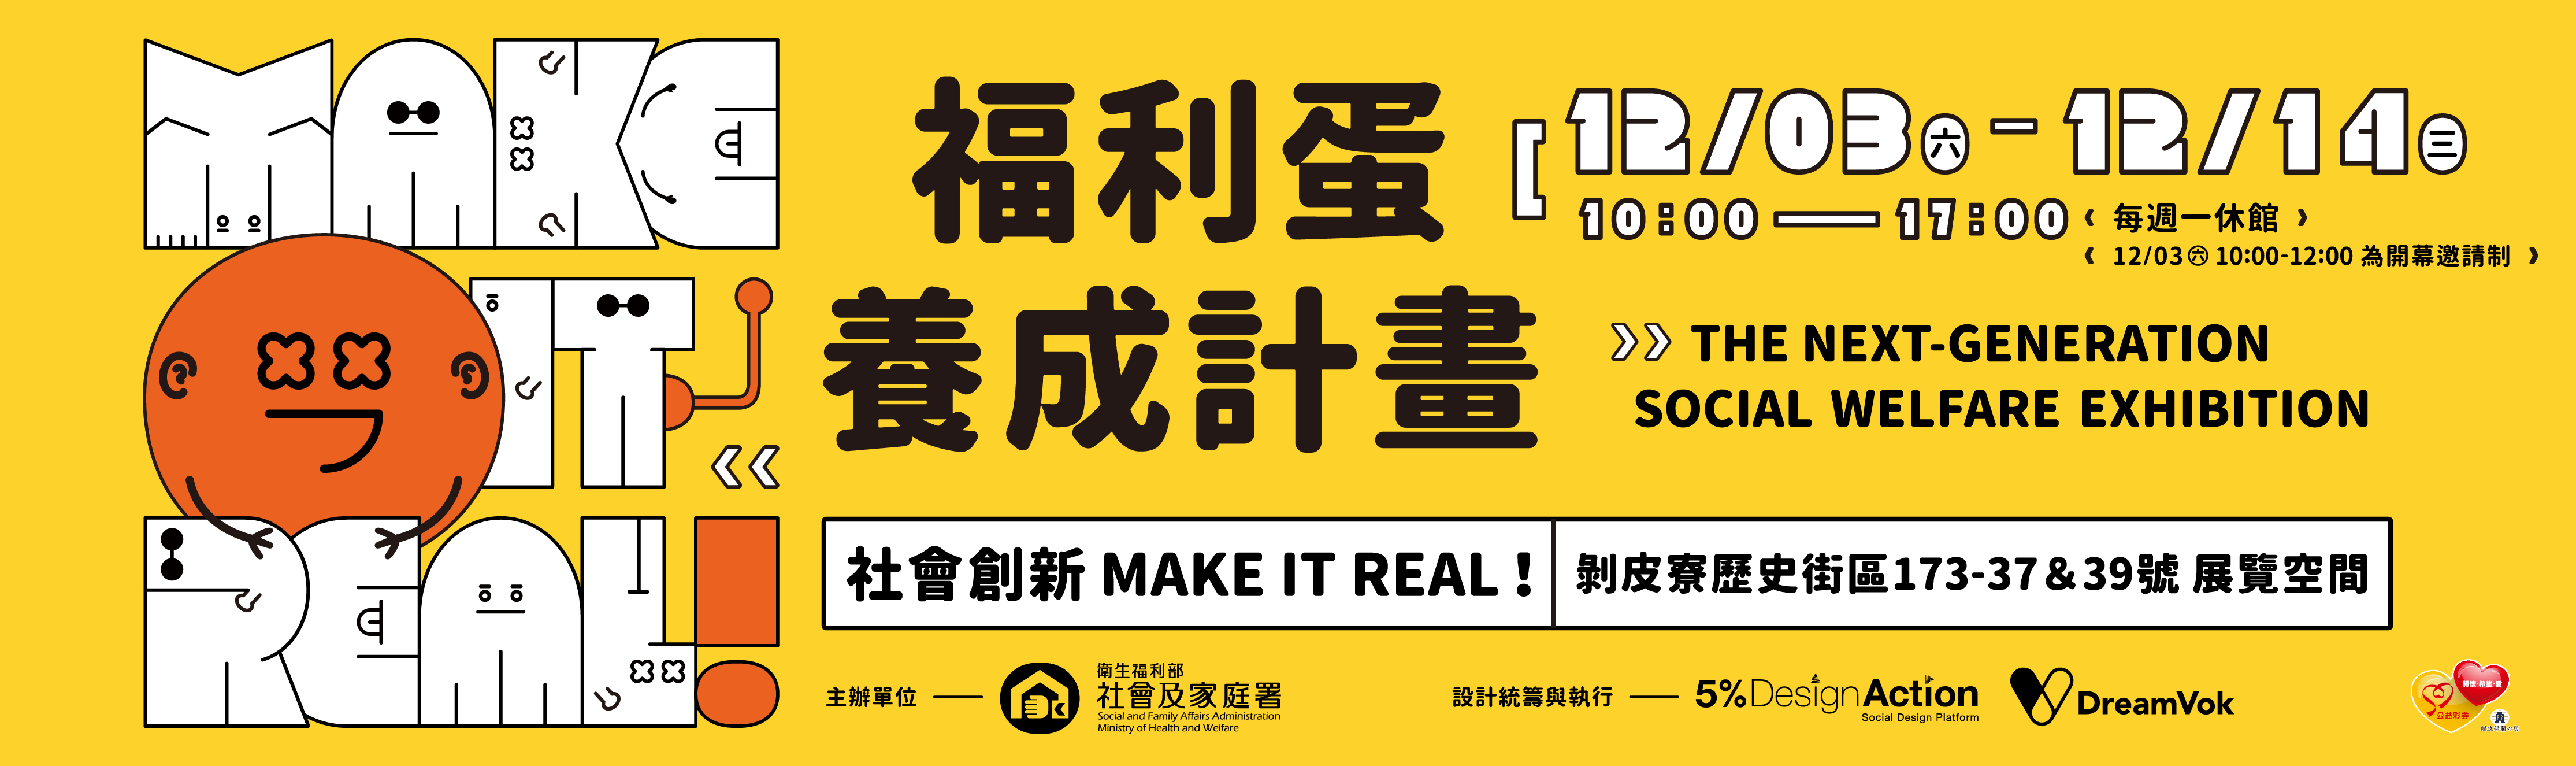 Make  It  Real！福利蛋養成計畫 The Next-generation Social Welfare Exhibition